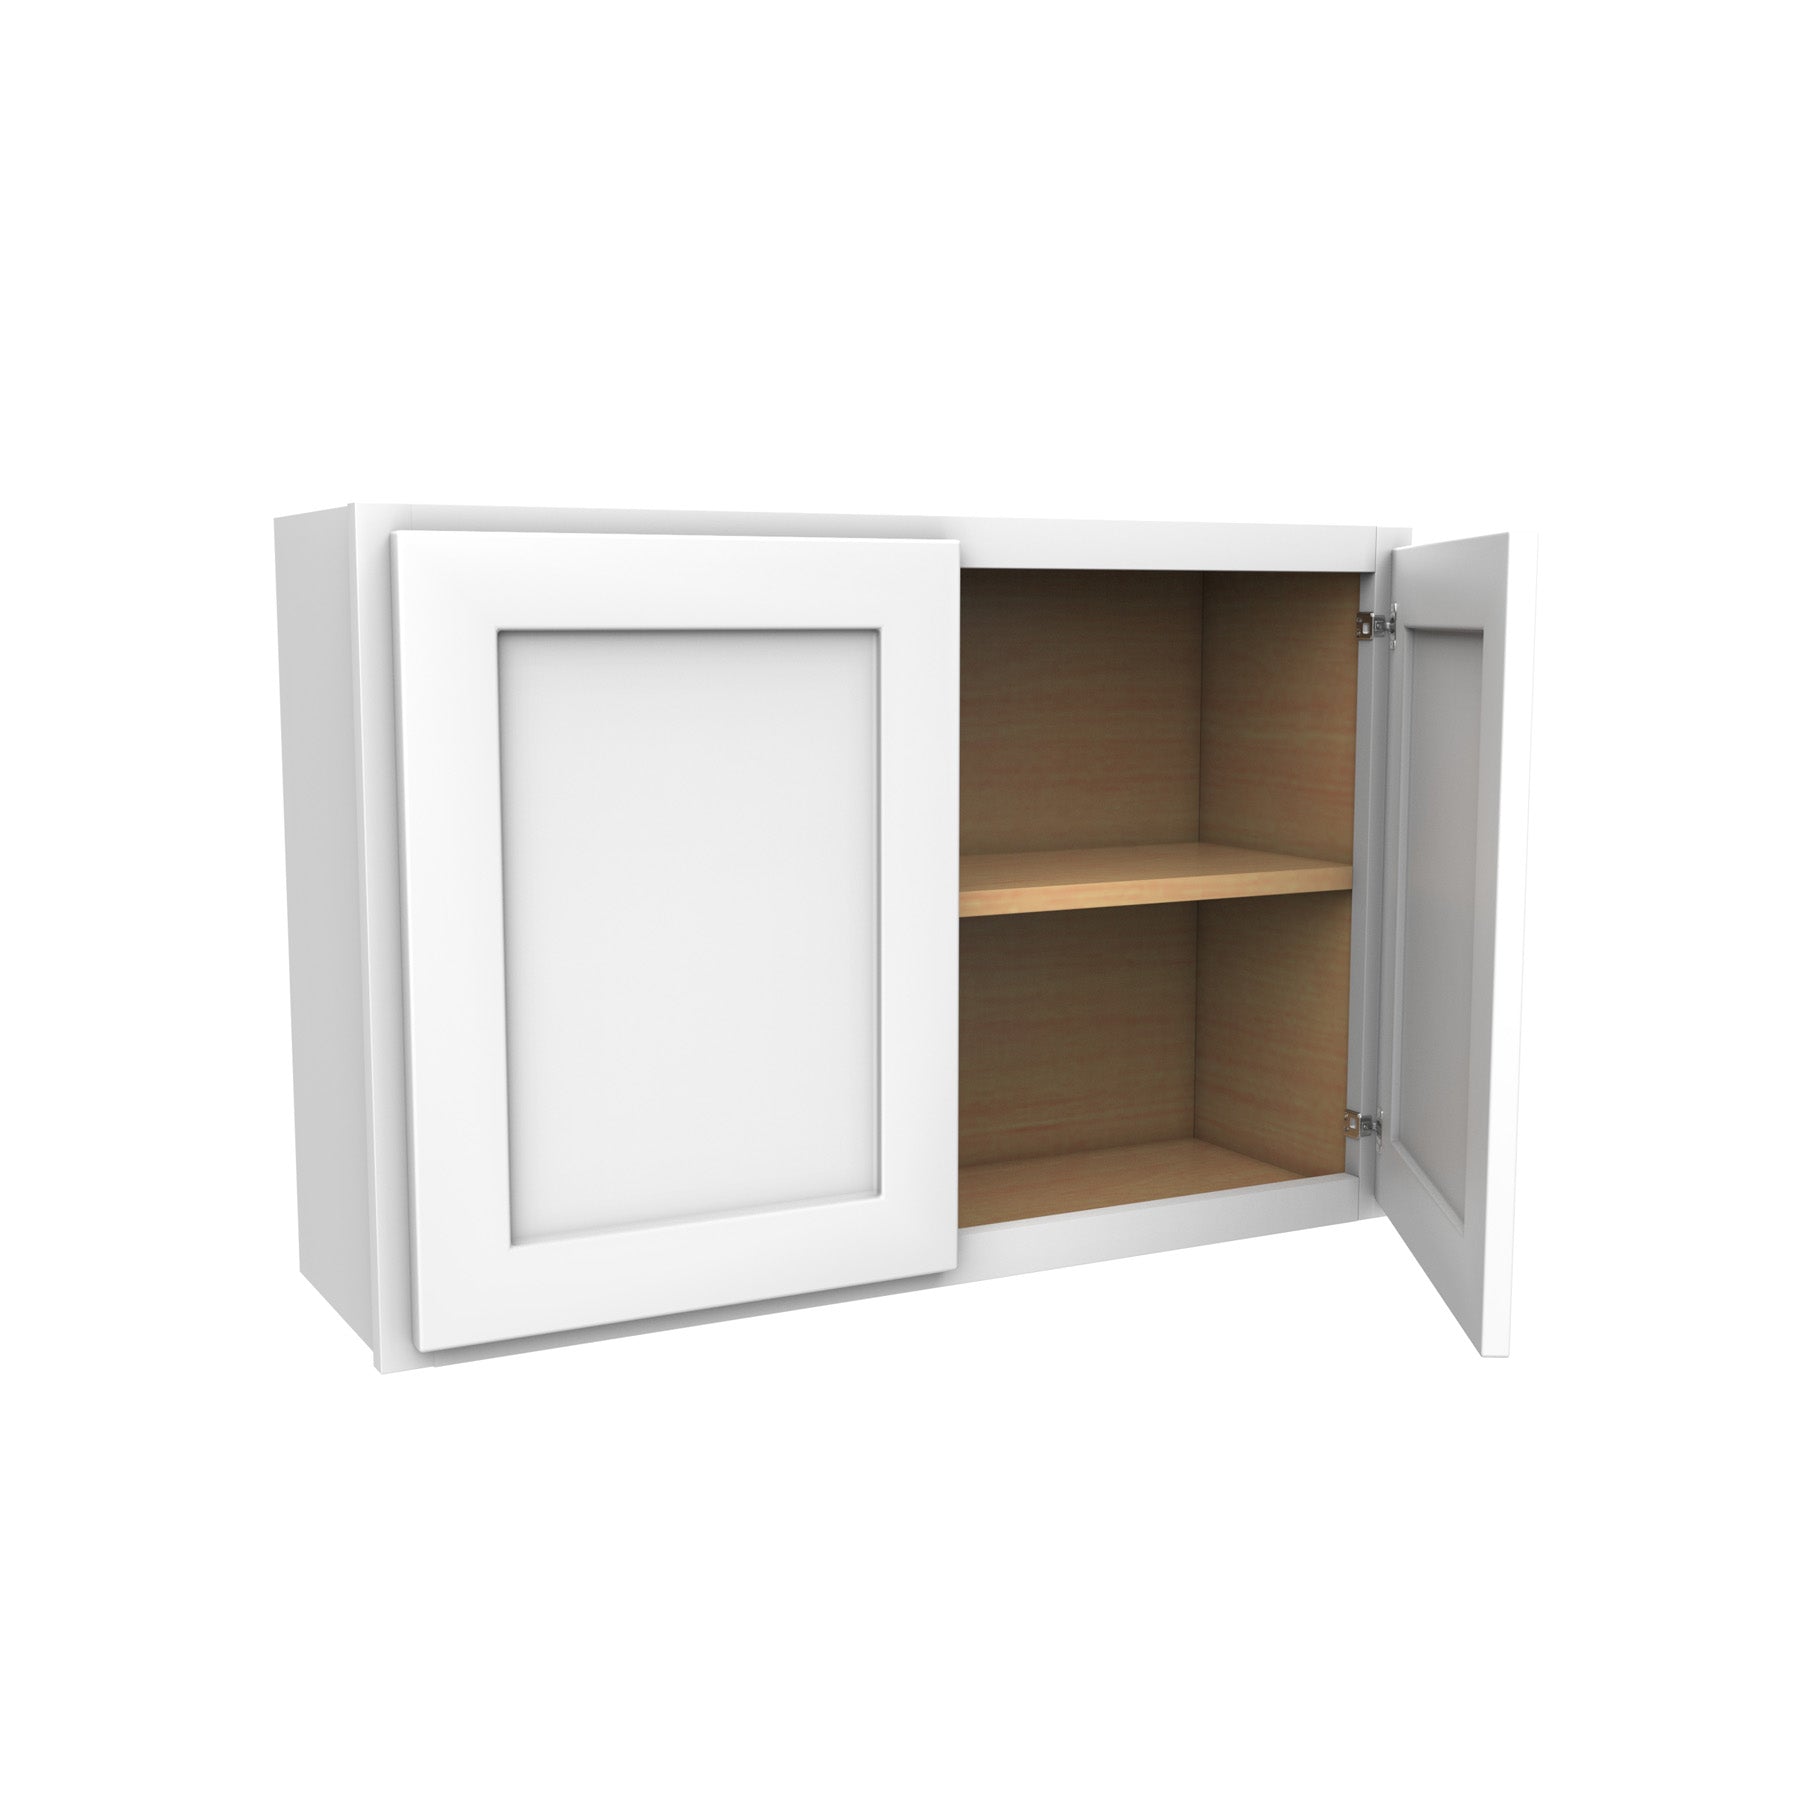 Luxor White - Double Door Wall Cabinet | 36"W x 24"H x 12"D